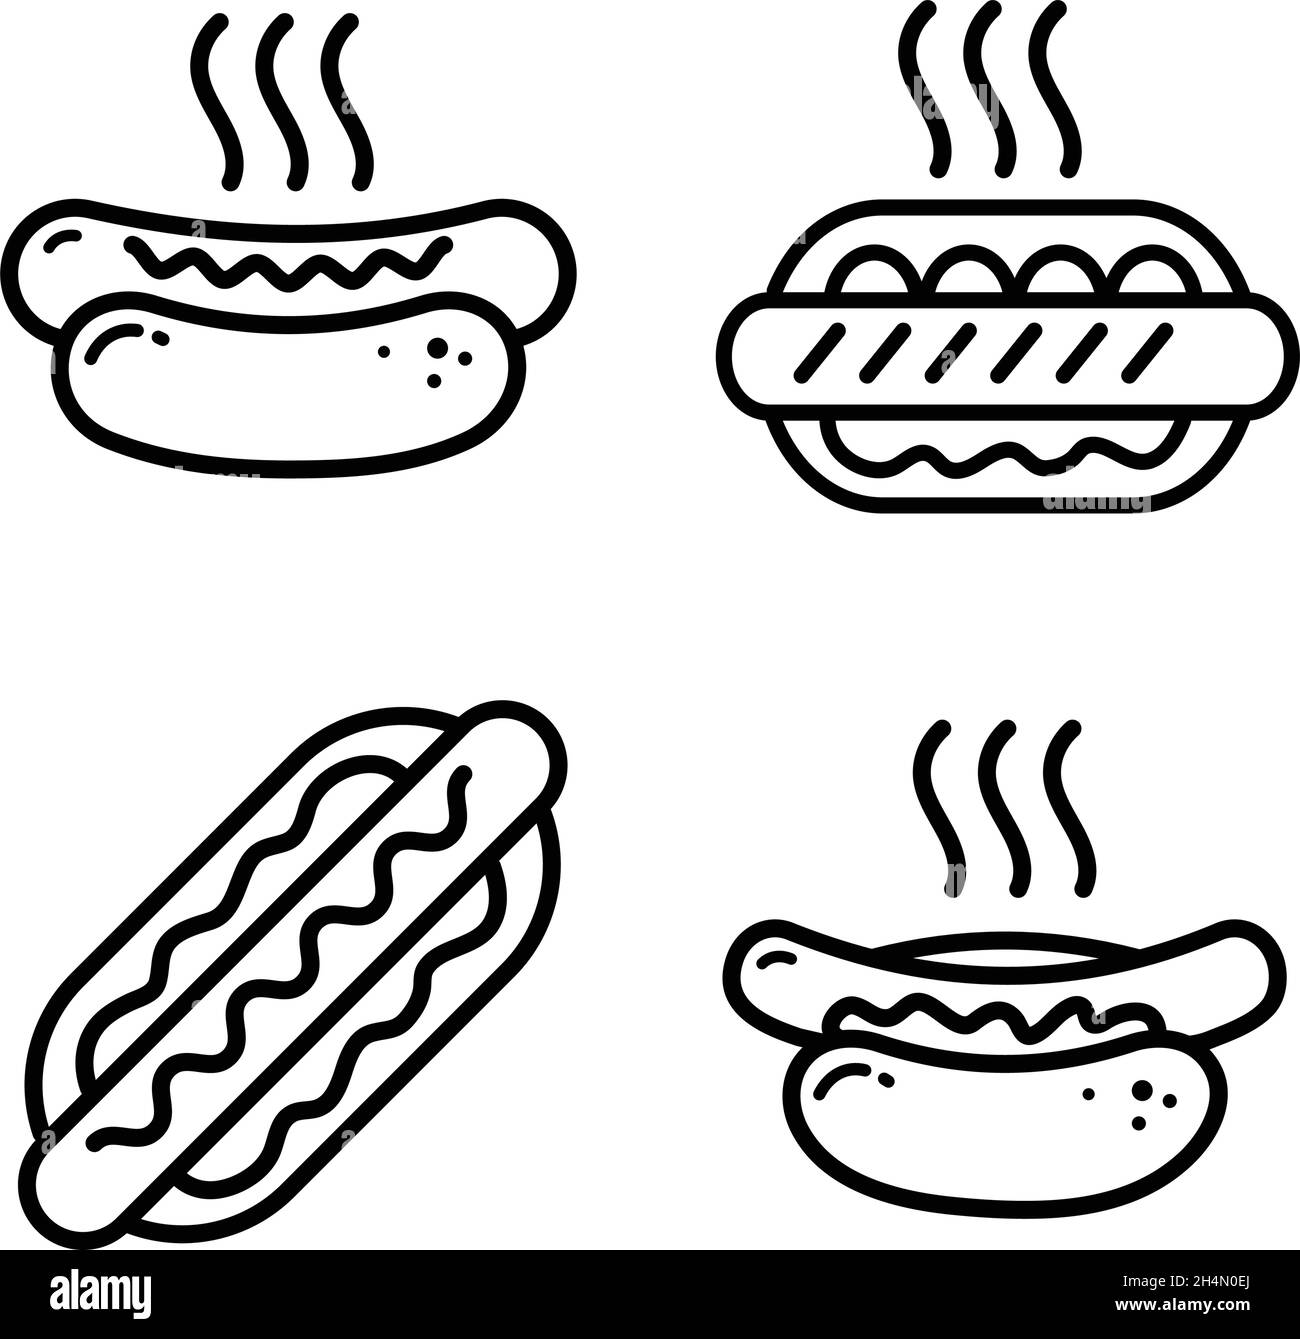 Hotdog sandwich outline icon set, for web and mobile, modern minimalistic flat design. Vector icon collection isolated on white background. Stock Vector